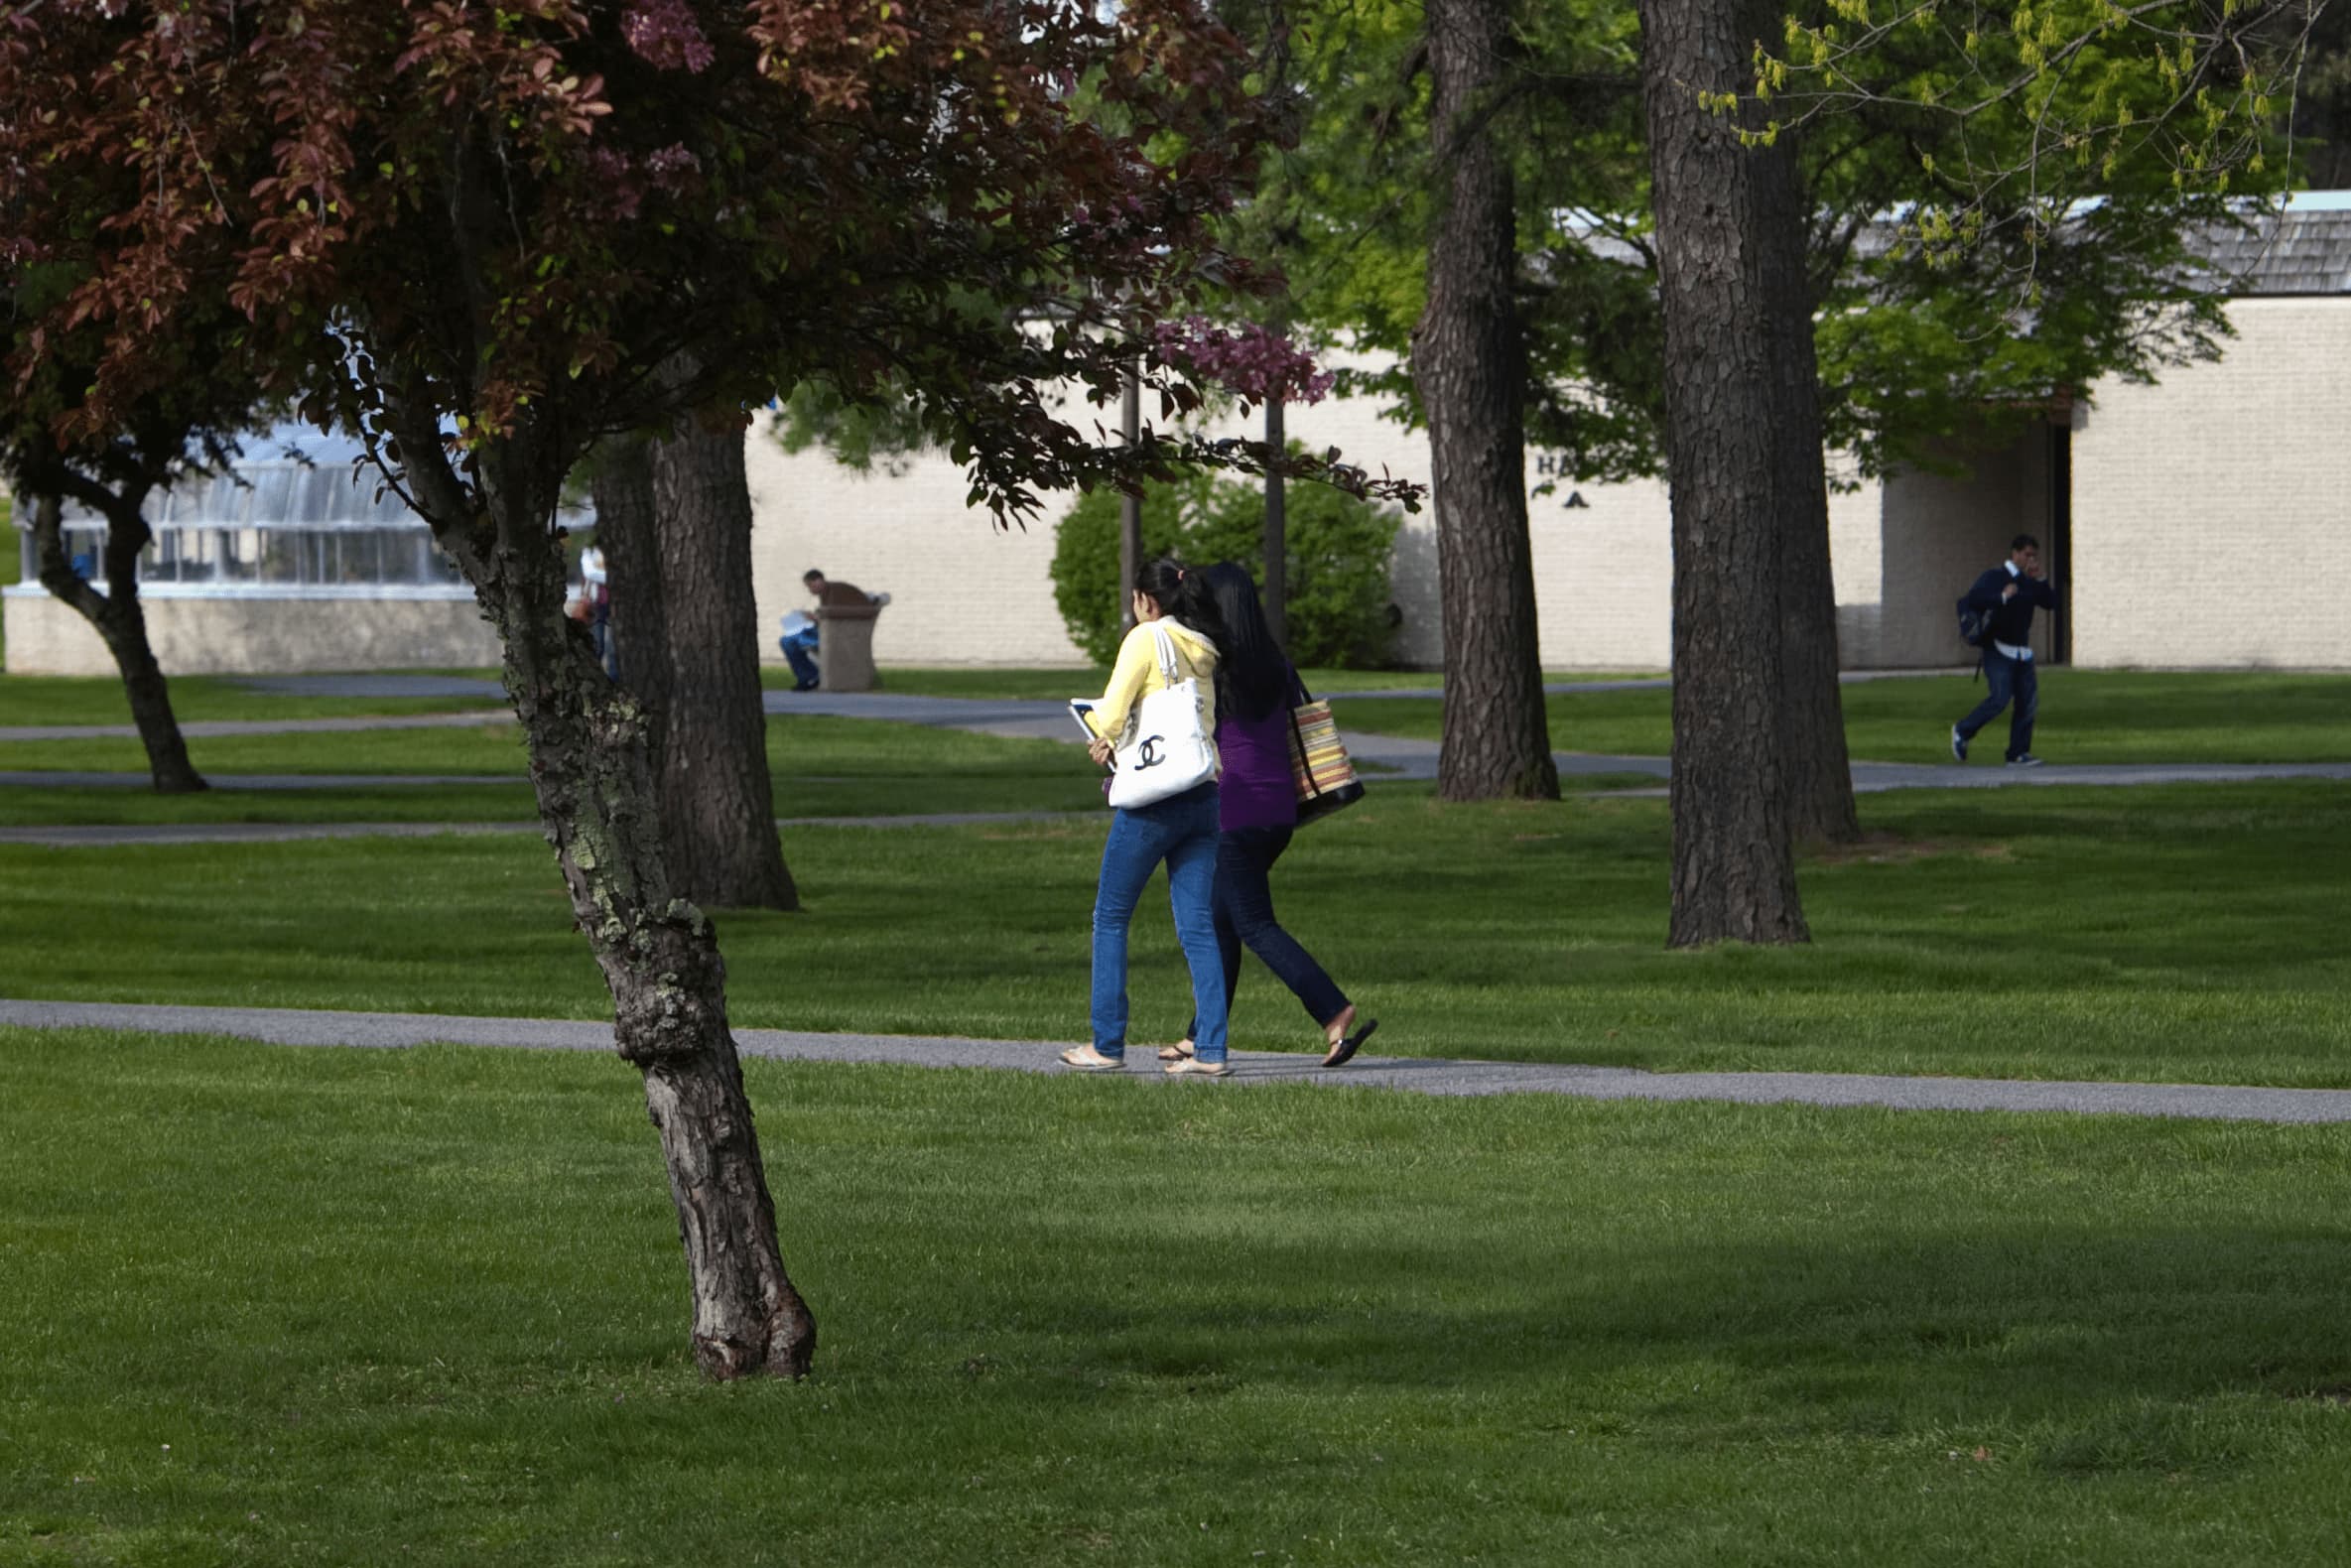 Students walking safely across campus